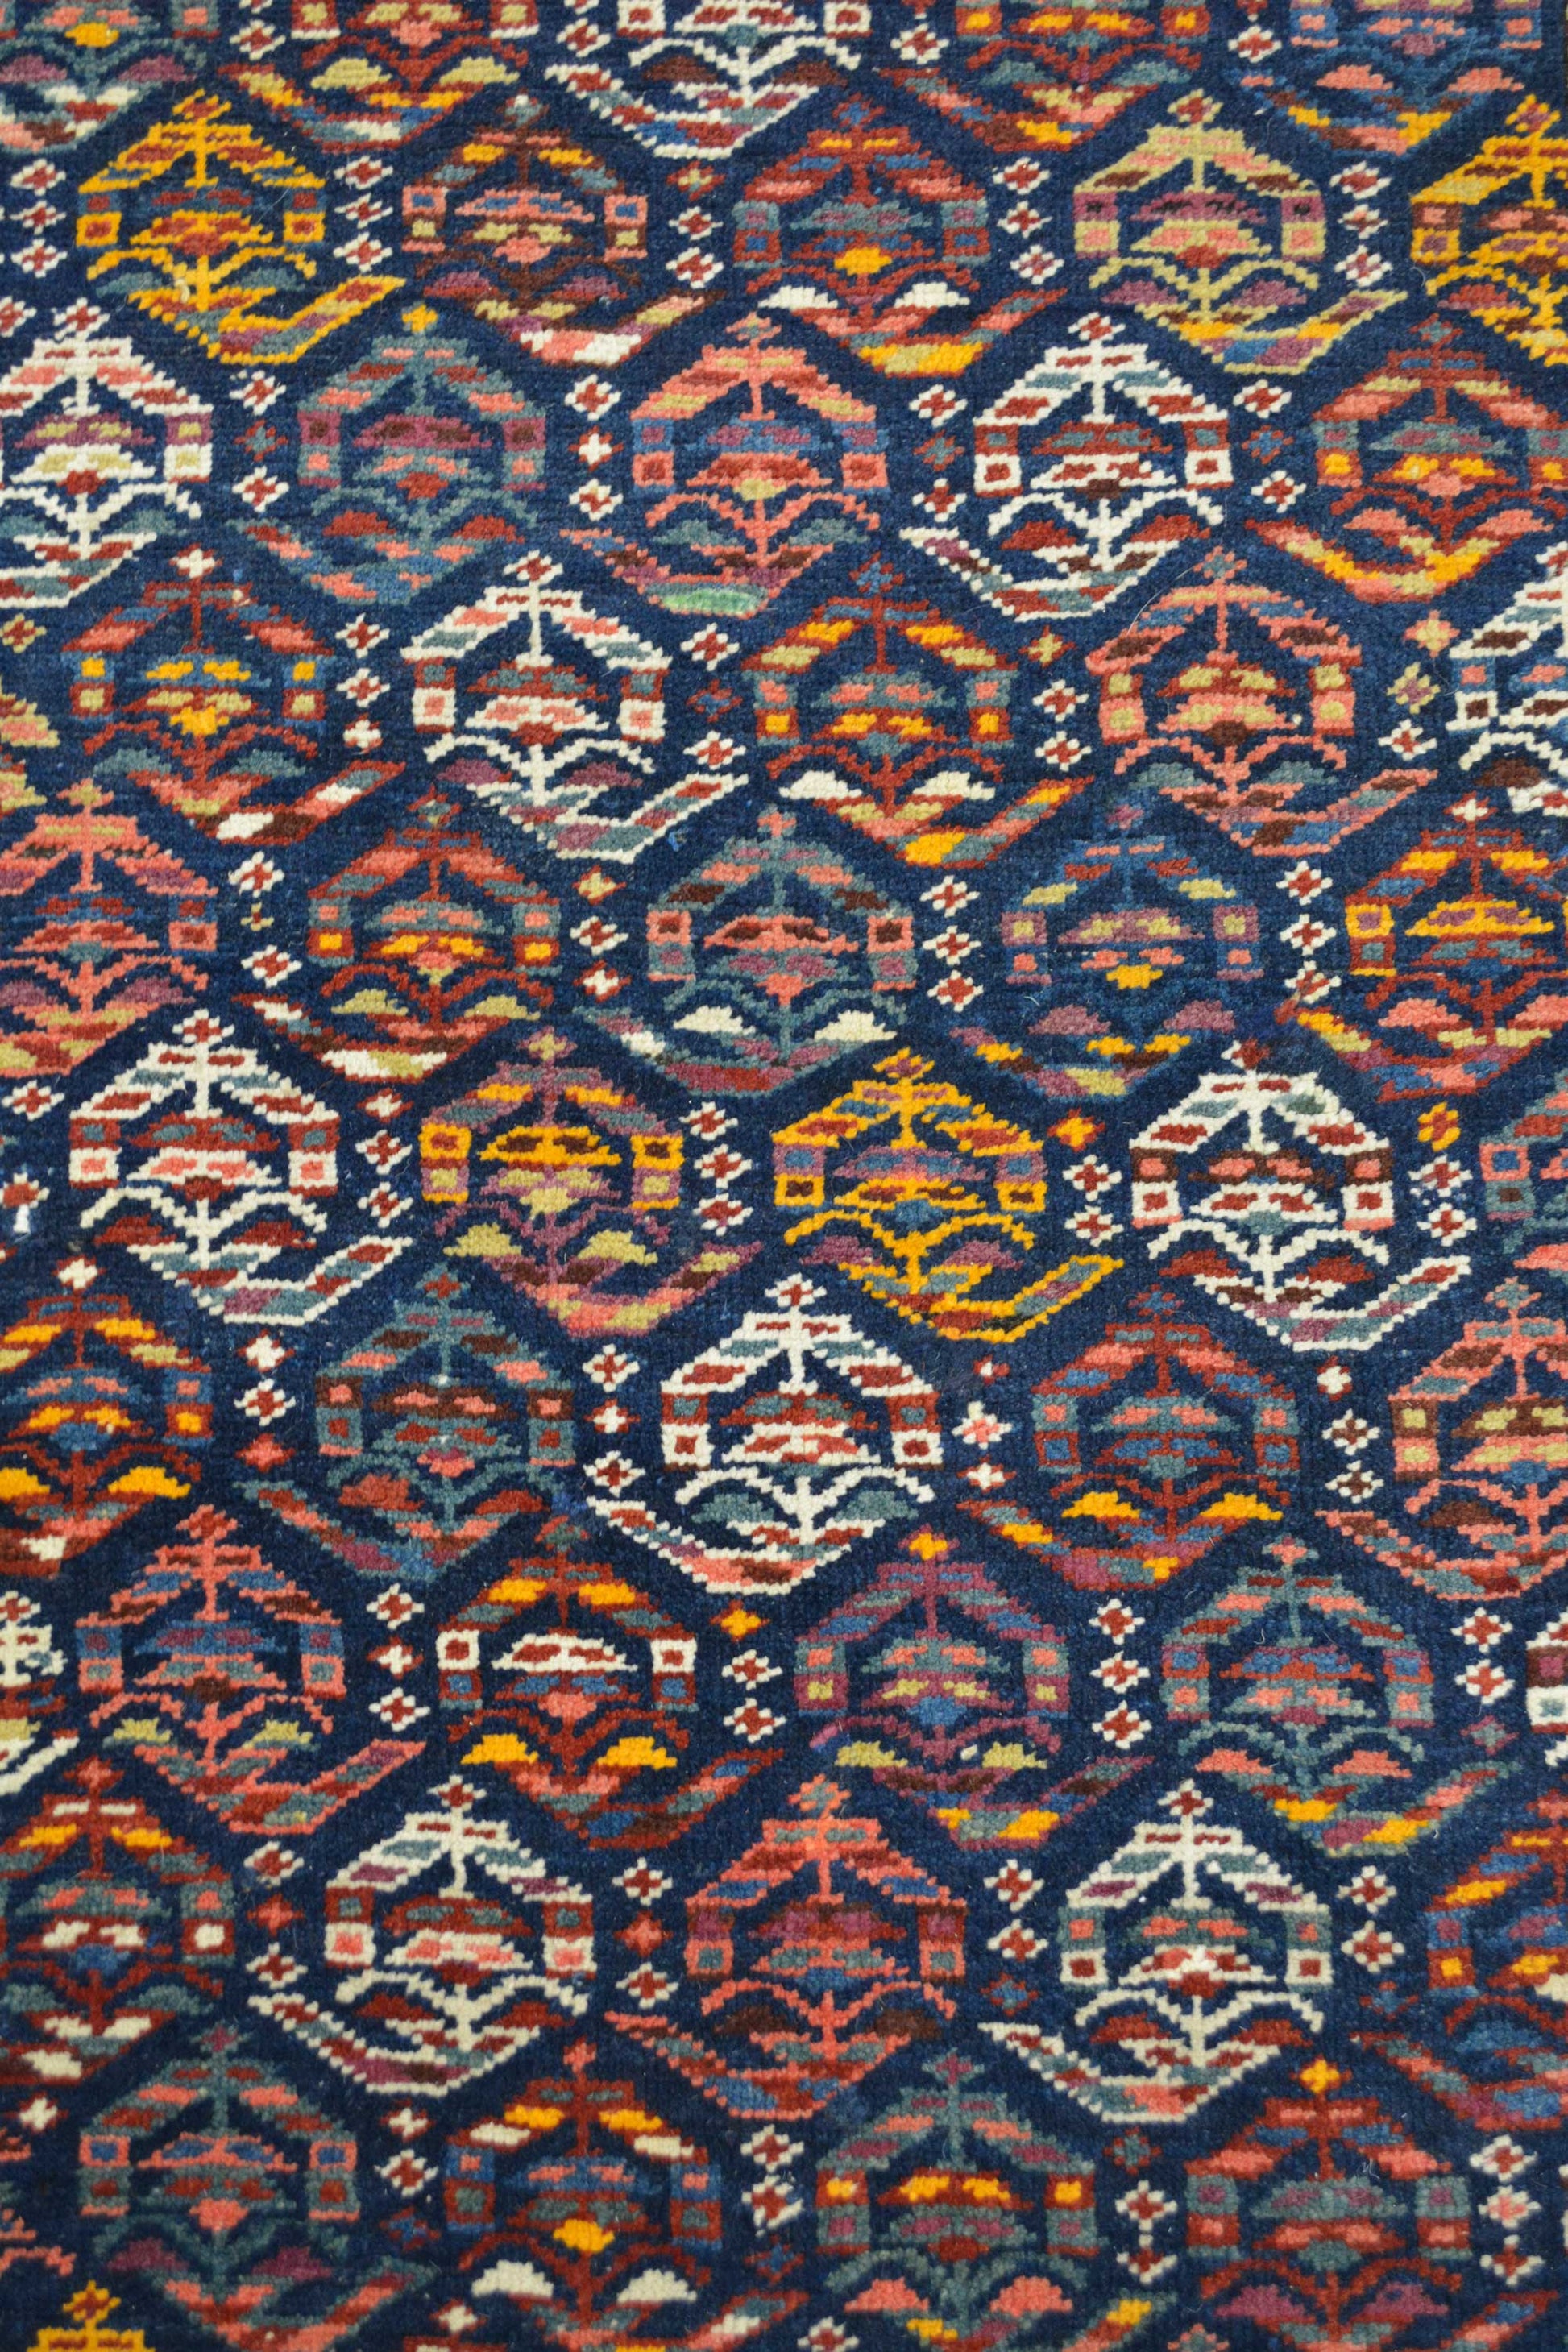 The center of the rug renders blue background with an hexagon pattern on top. These little hexagons are made of small pieces. 